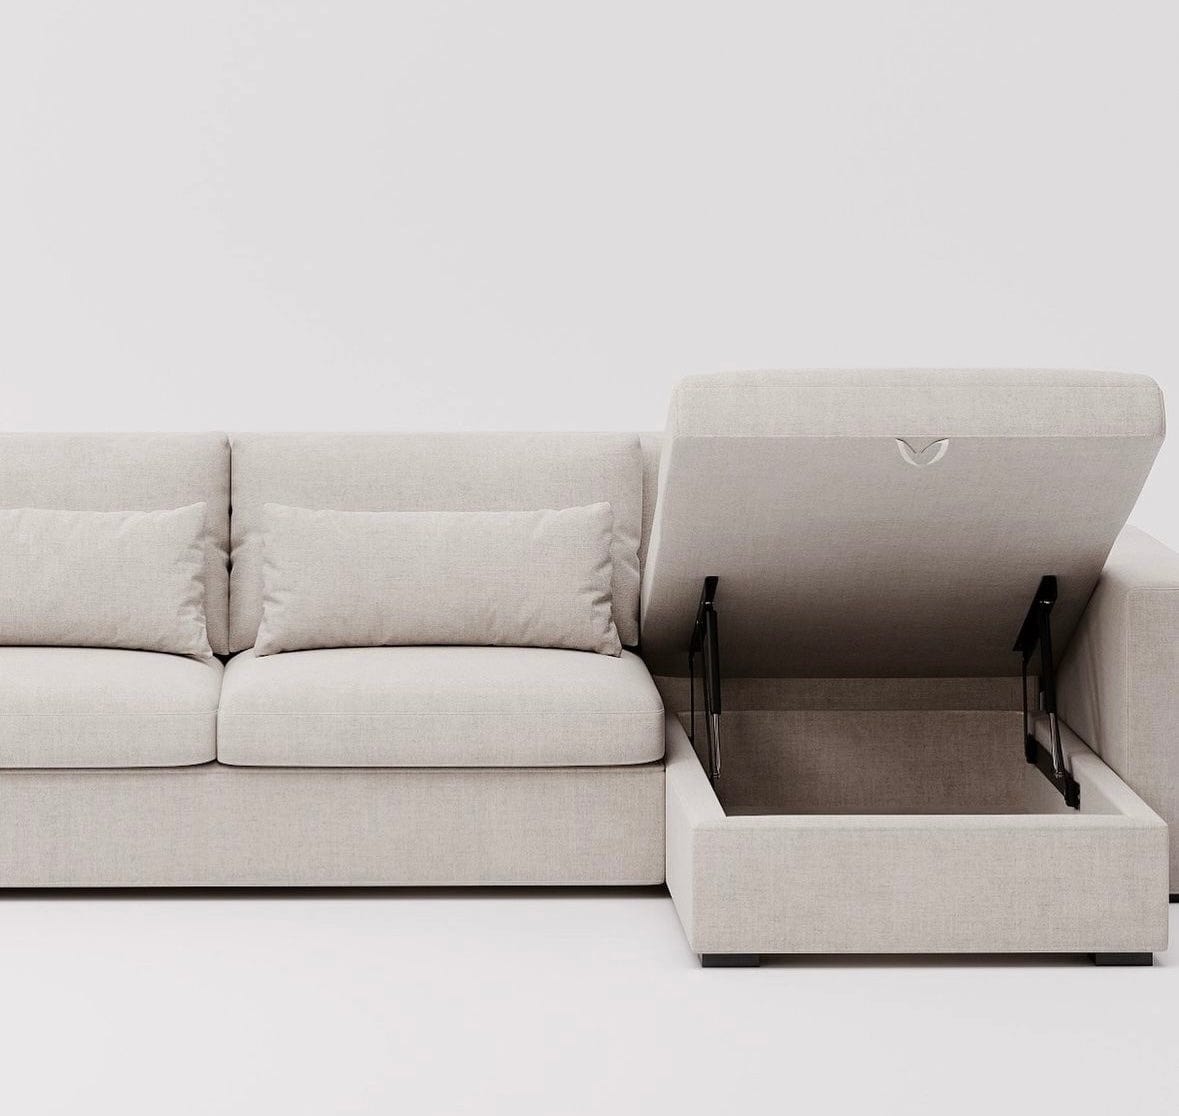 Home Atelier Prince Sofa Bed